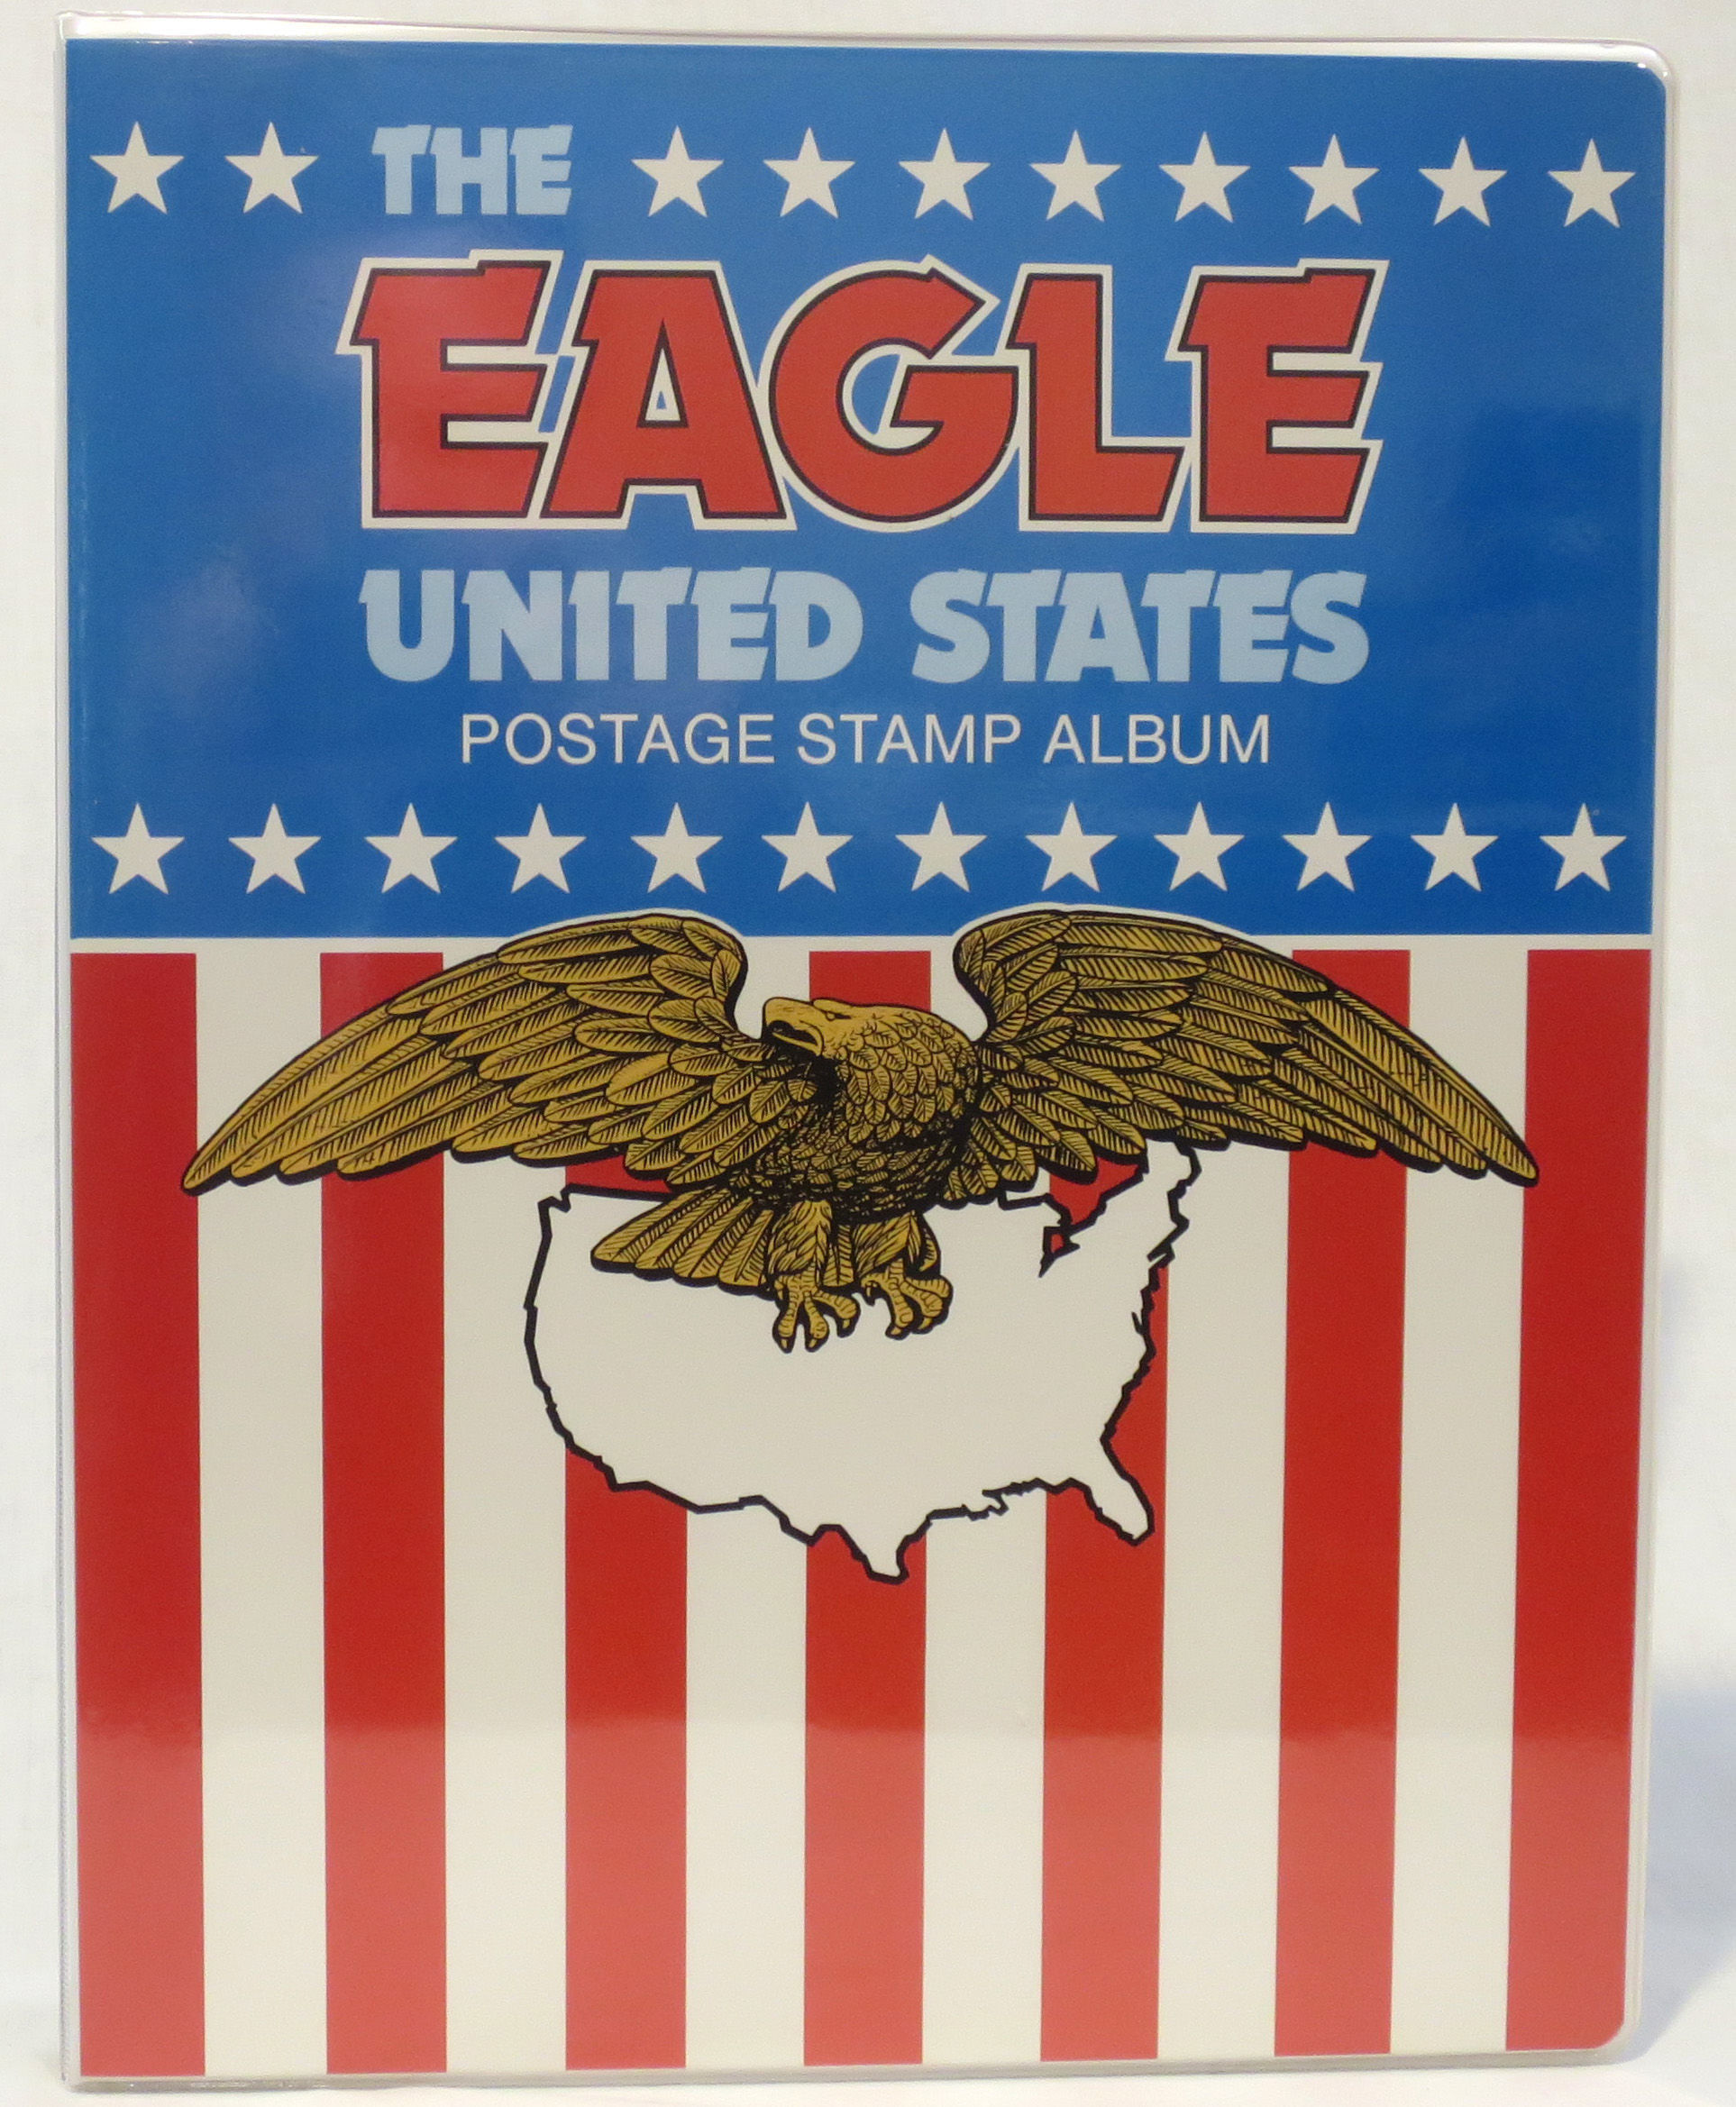  USA Postage Stamp Single 1981 Domestic Mail Eagle C-Rate Issue  20 Cents Scott #1946 : Toys & Games